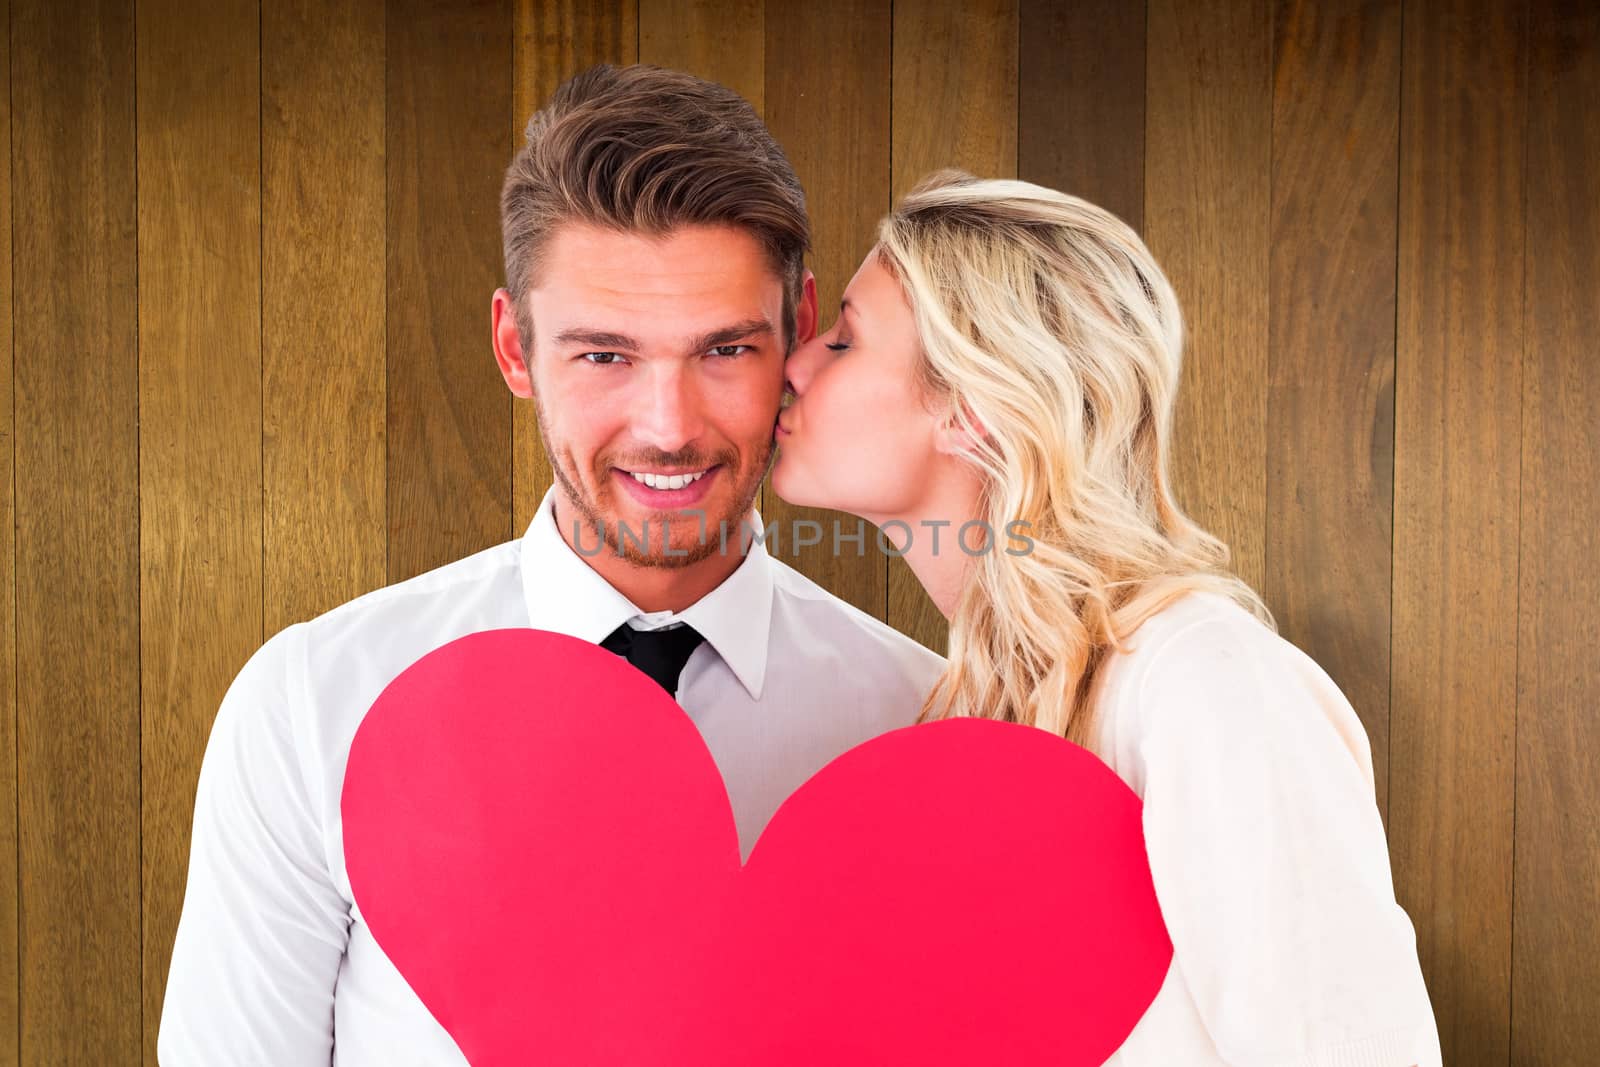 Attractive young couple holding red heart against wooden surface with planks